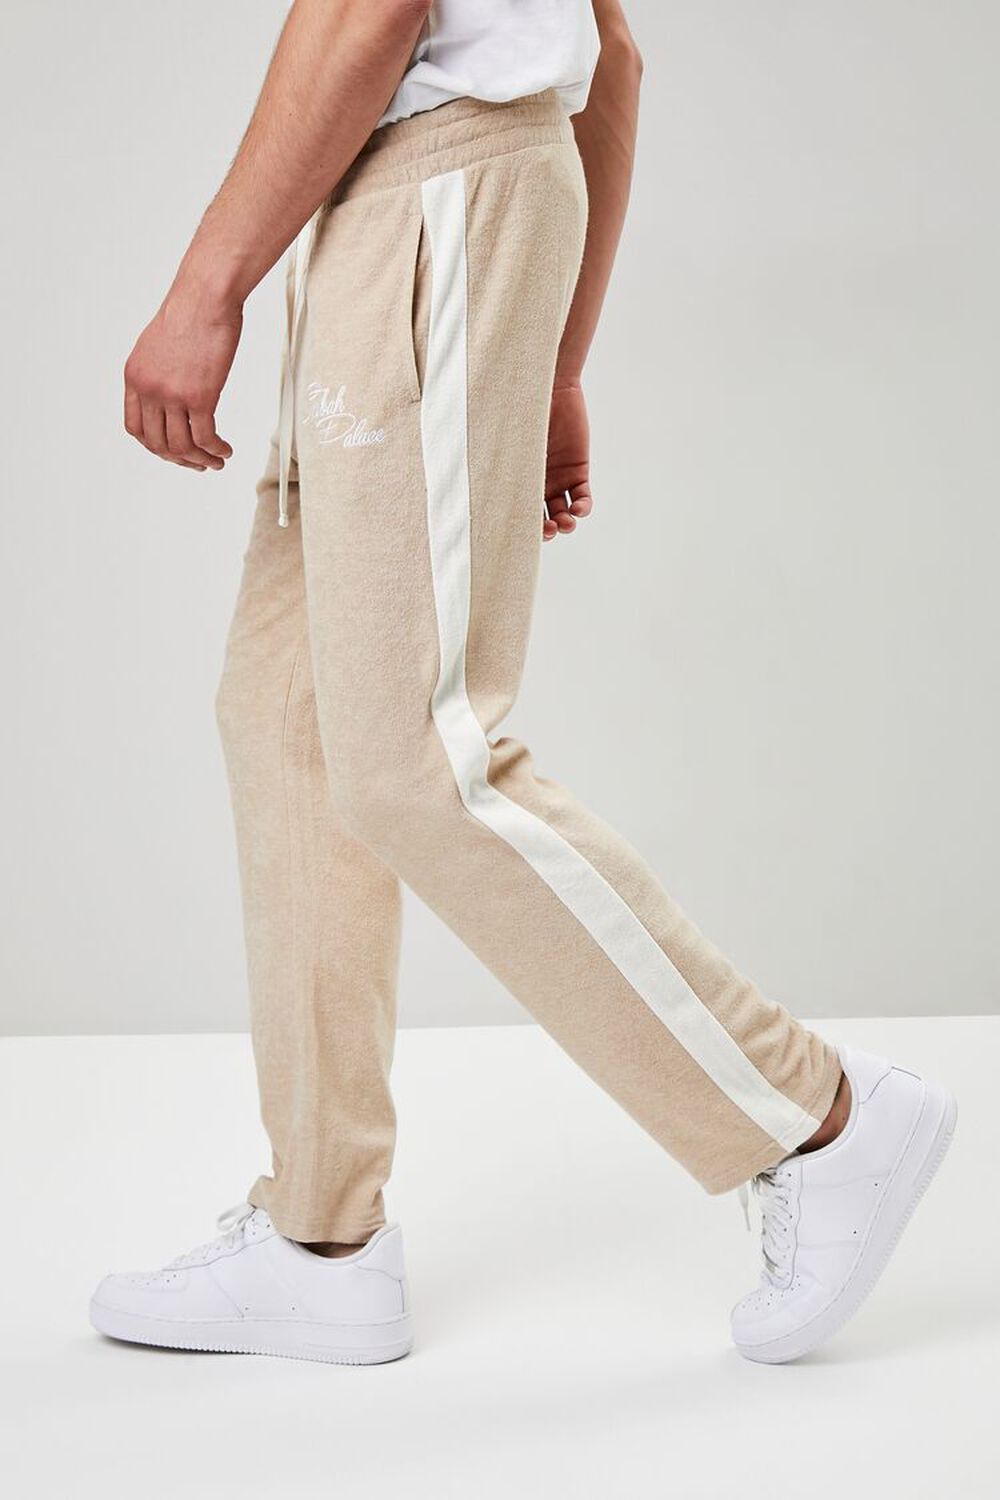 Embroidered Casbah Palace Graphic Sweatpants